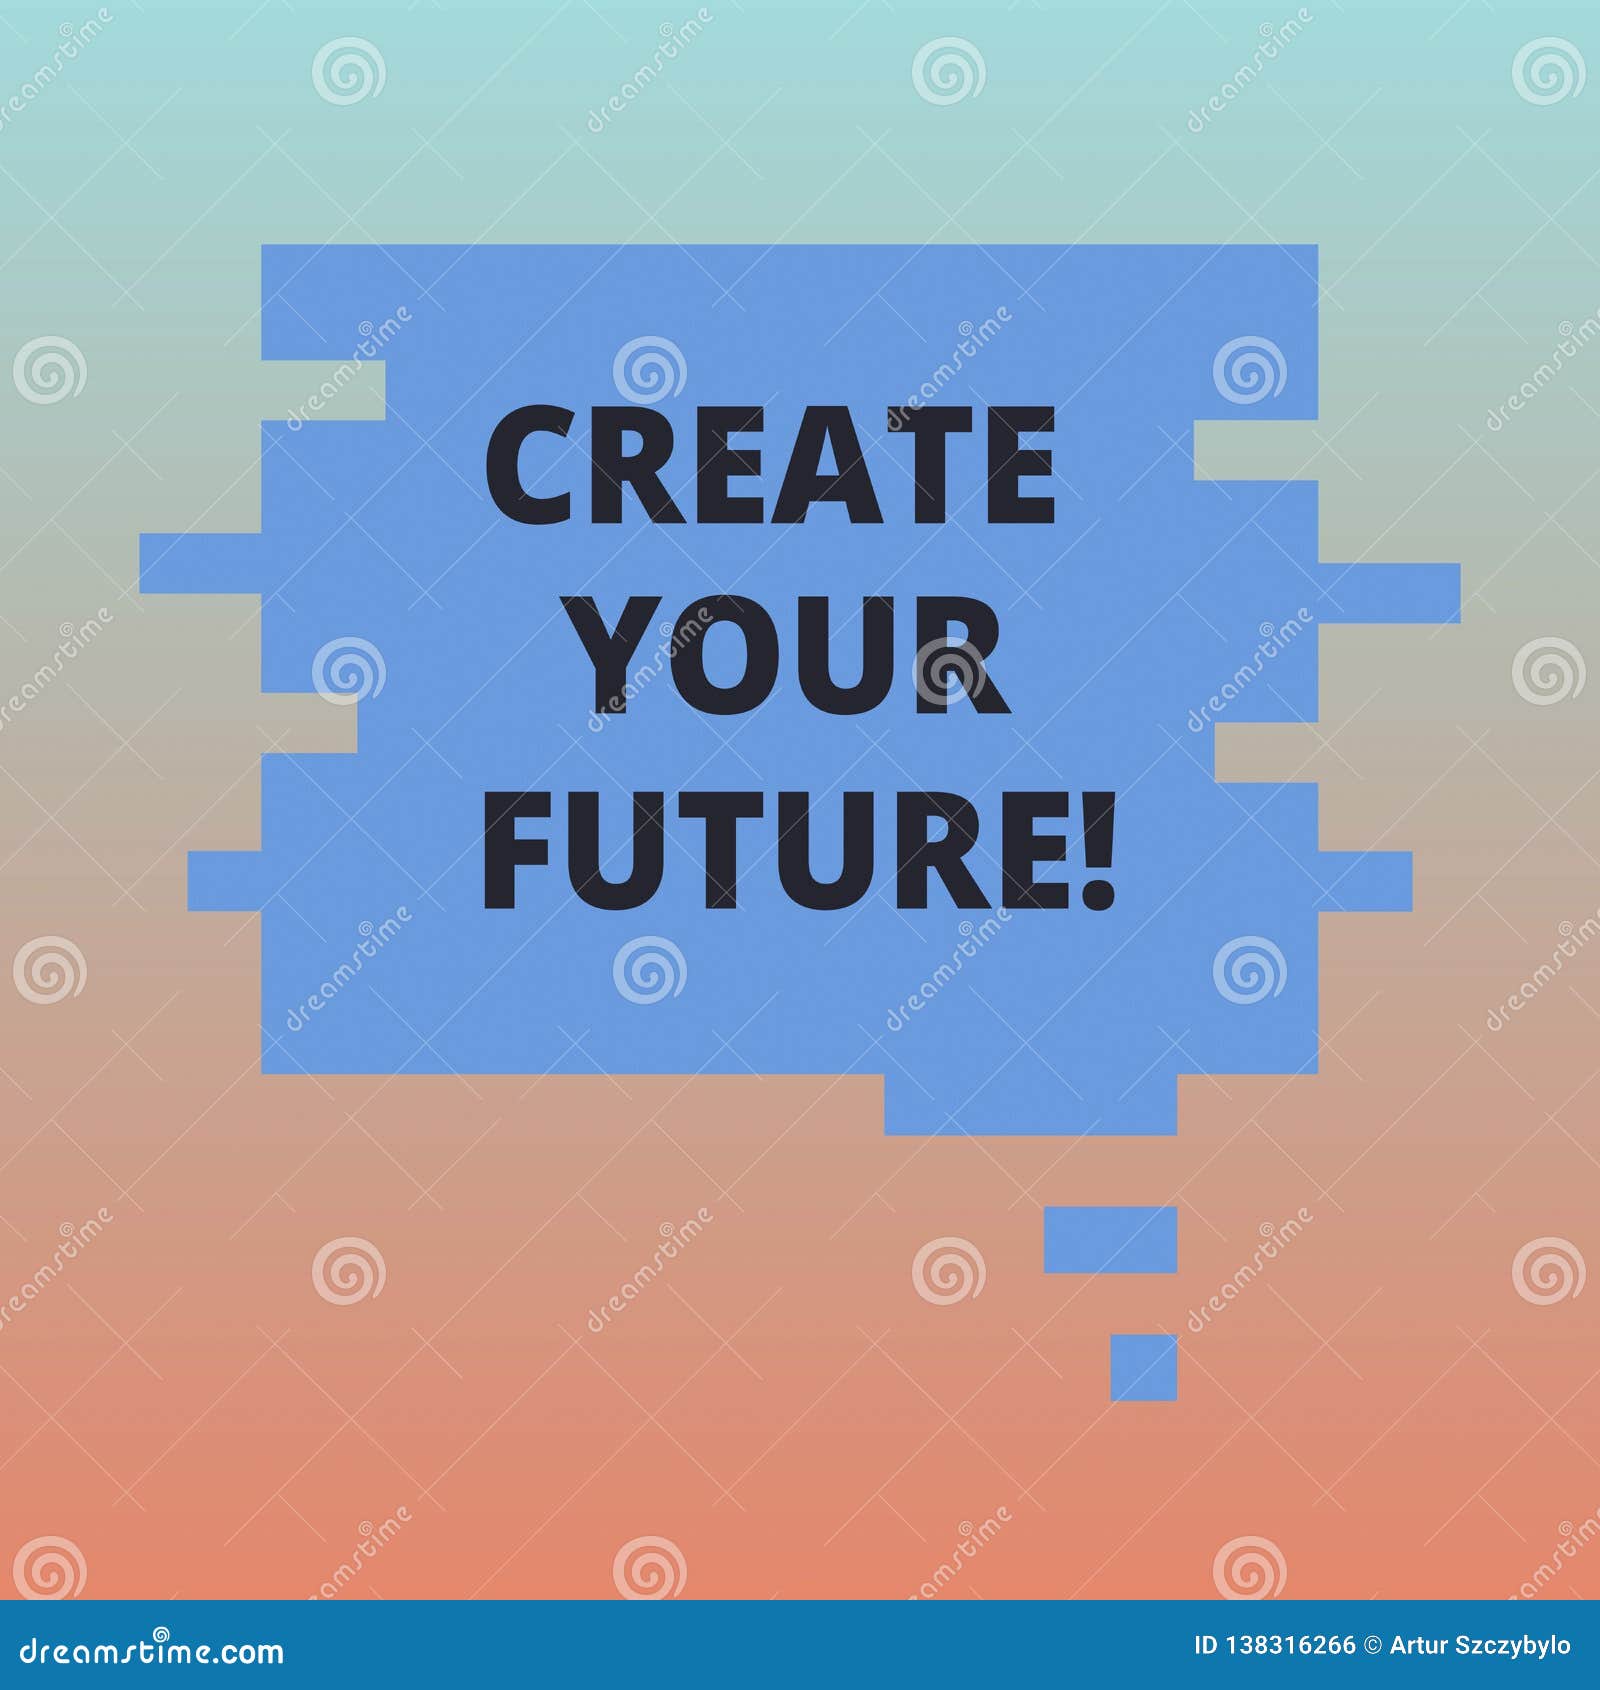 Handwriting Text Create Your Future Concept Meaning Work Hard To Shape Your Life And Have Good Career Blank Color Stock Illustration Illustration Of Motivational Path